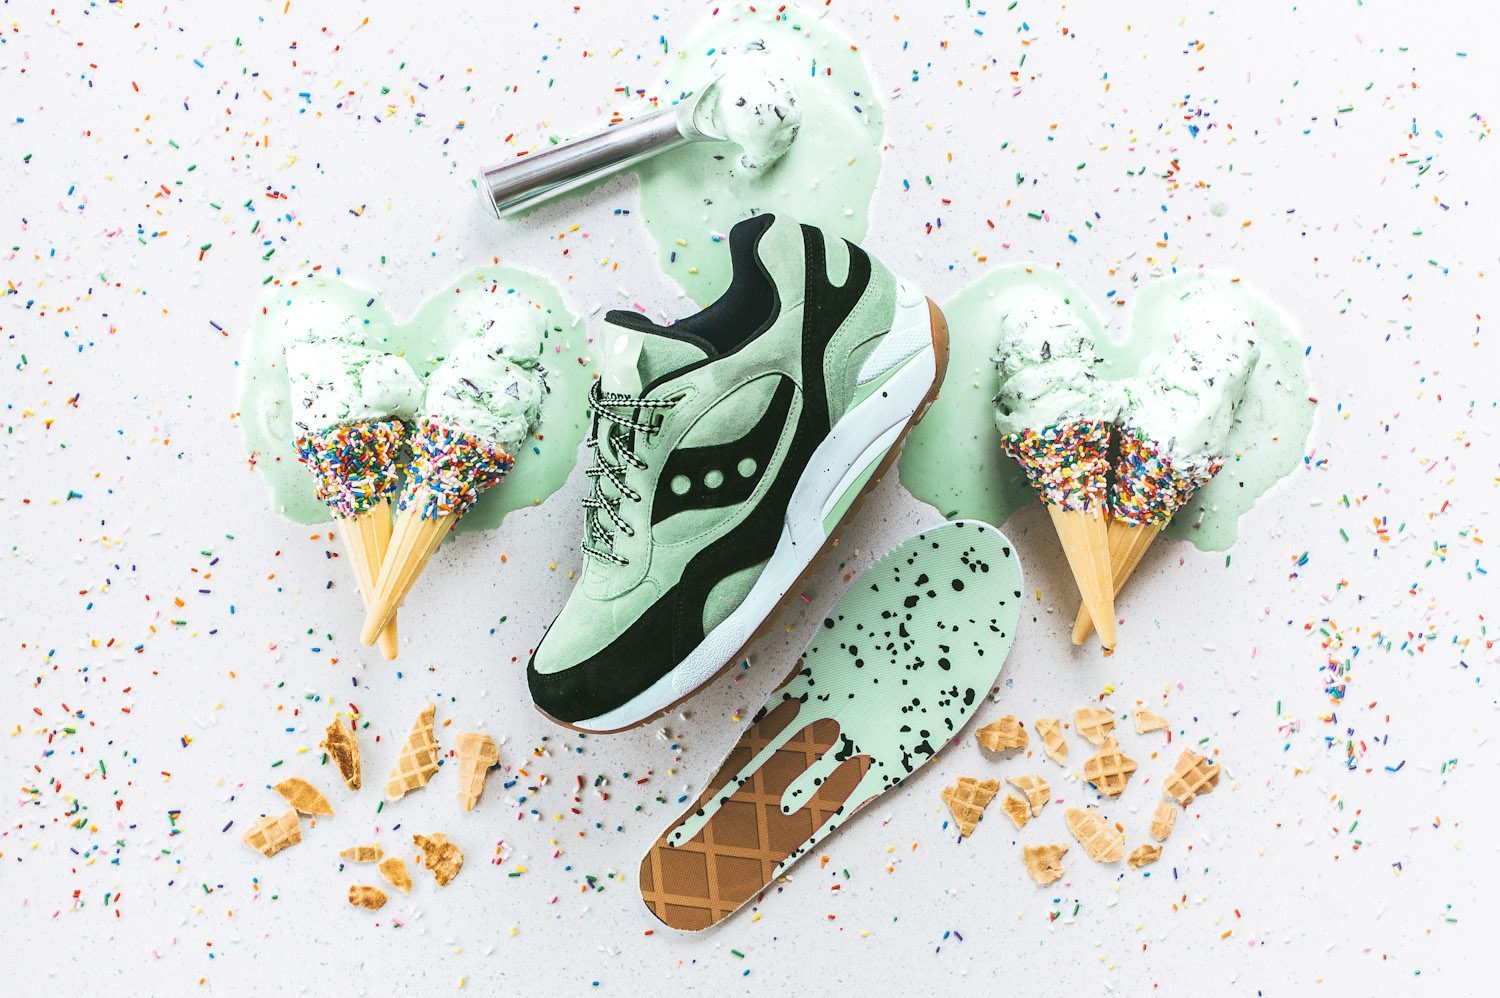 Saucony Originals G9 Shadow 6 Scoops Pack Mint Chocolate Chip